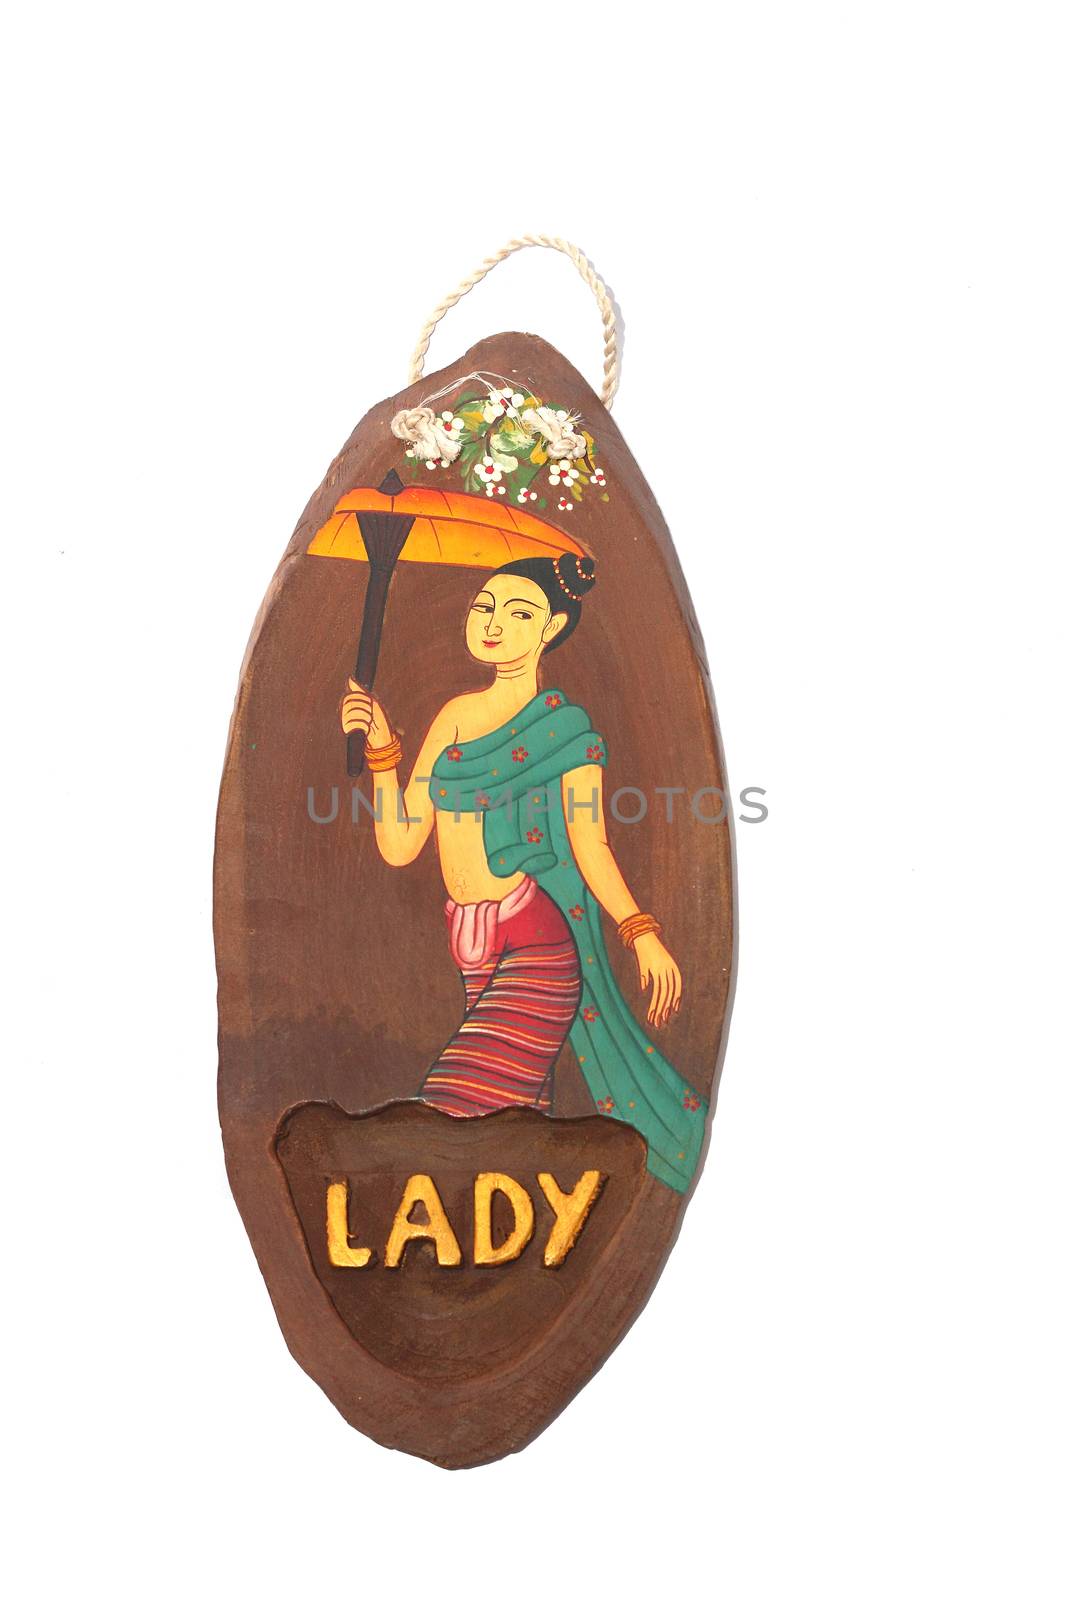 Lady toilet sign. Natural teak wood restroom sign paint Thai art handcraft decorate toilet woman sign isolated on white background by asiandelight